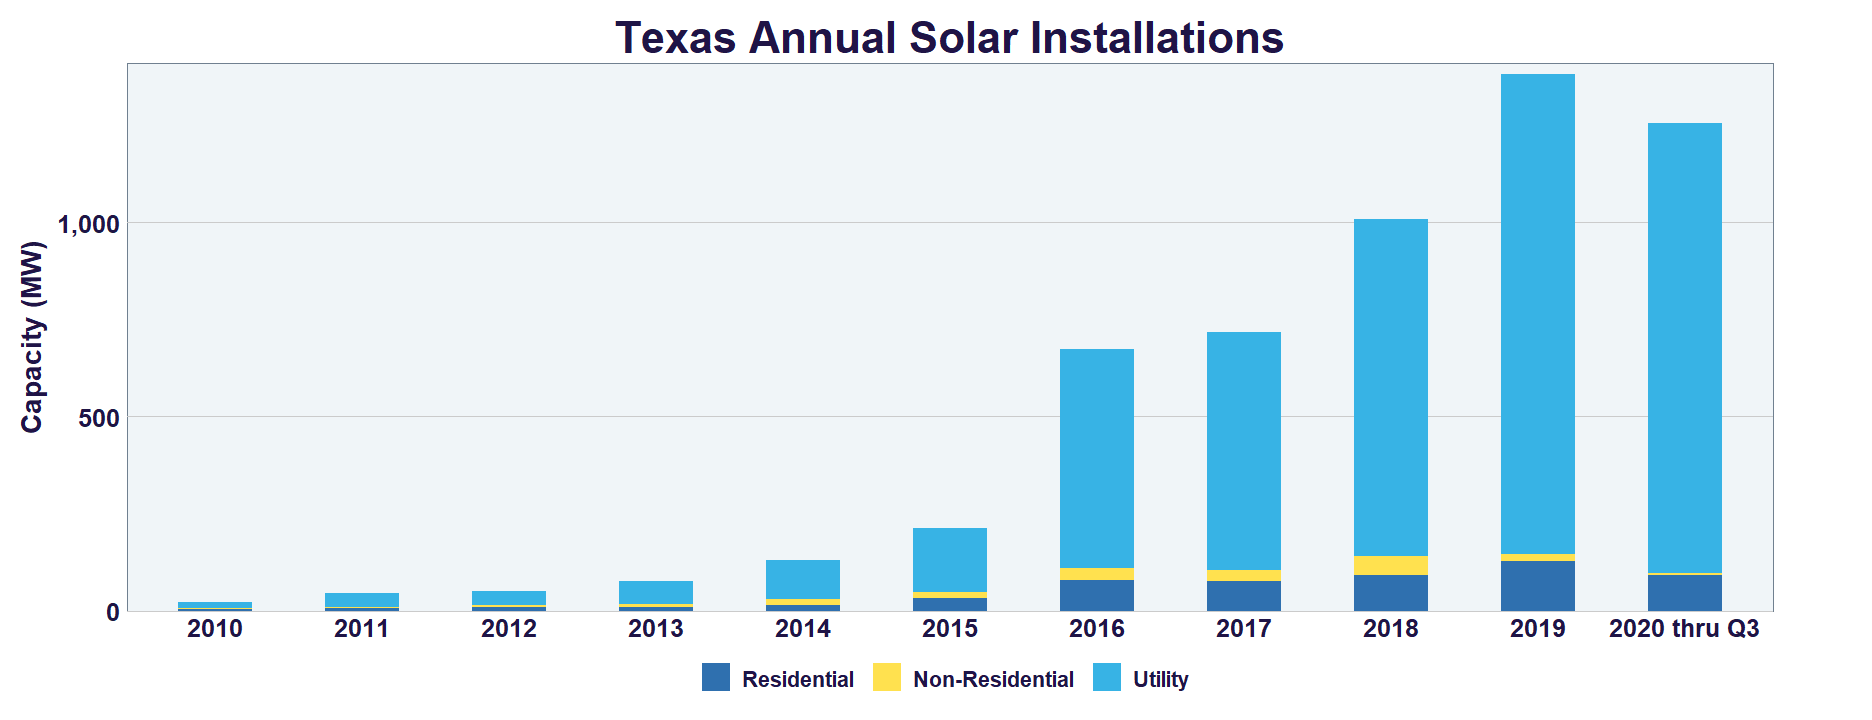 This bar chart shows Texas annual solar installations growing from just 10-20 MW capacity to over 1000MW added per year in 2018, 2019, 2020, etc.